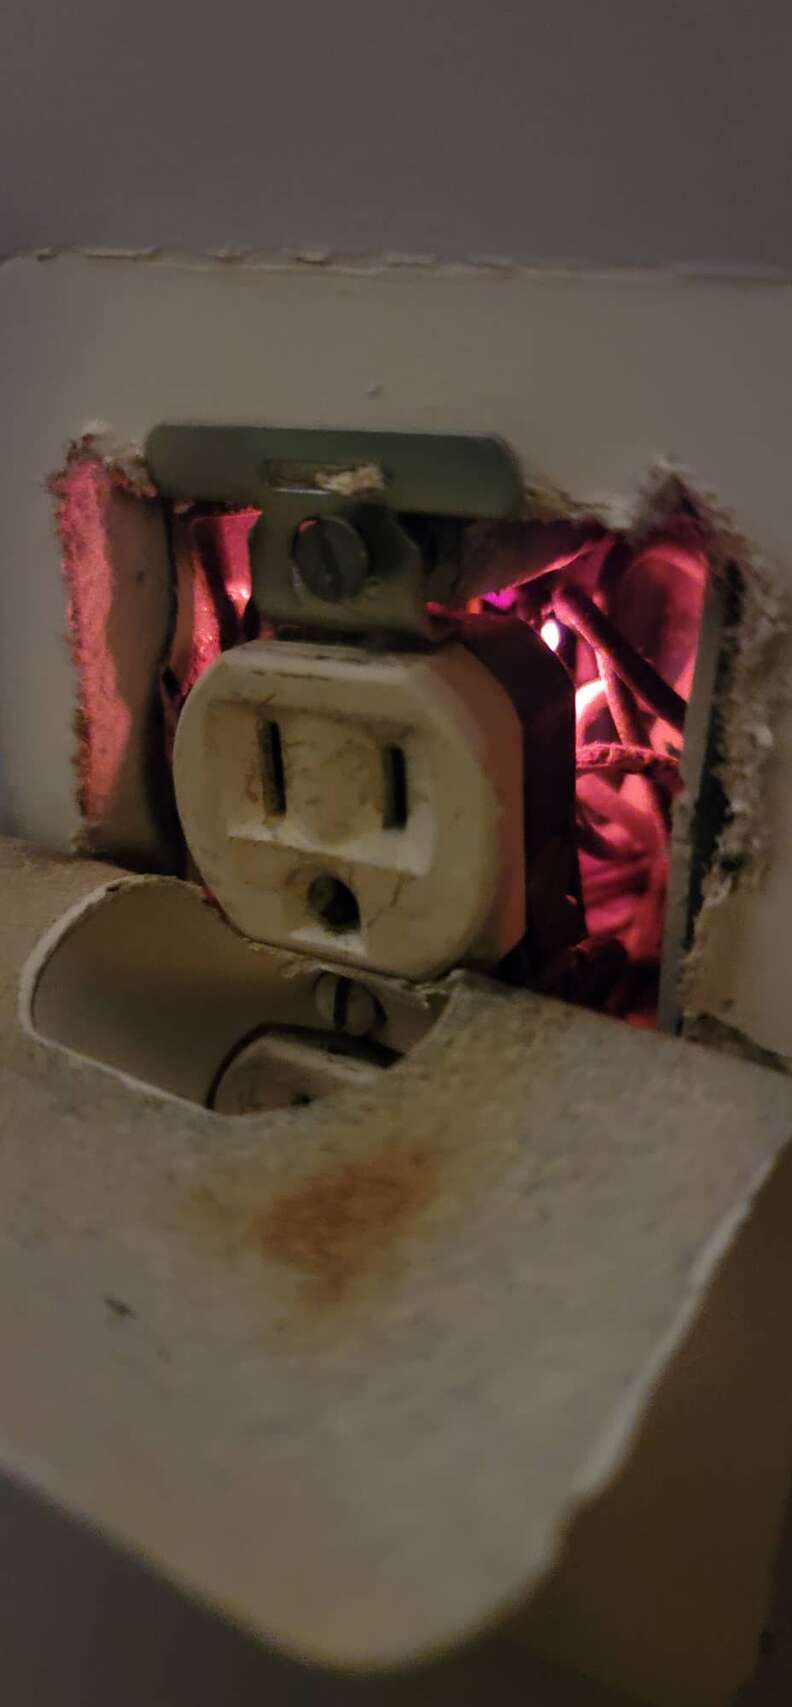 Puppy finds burning outlet